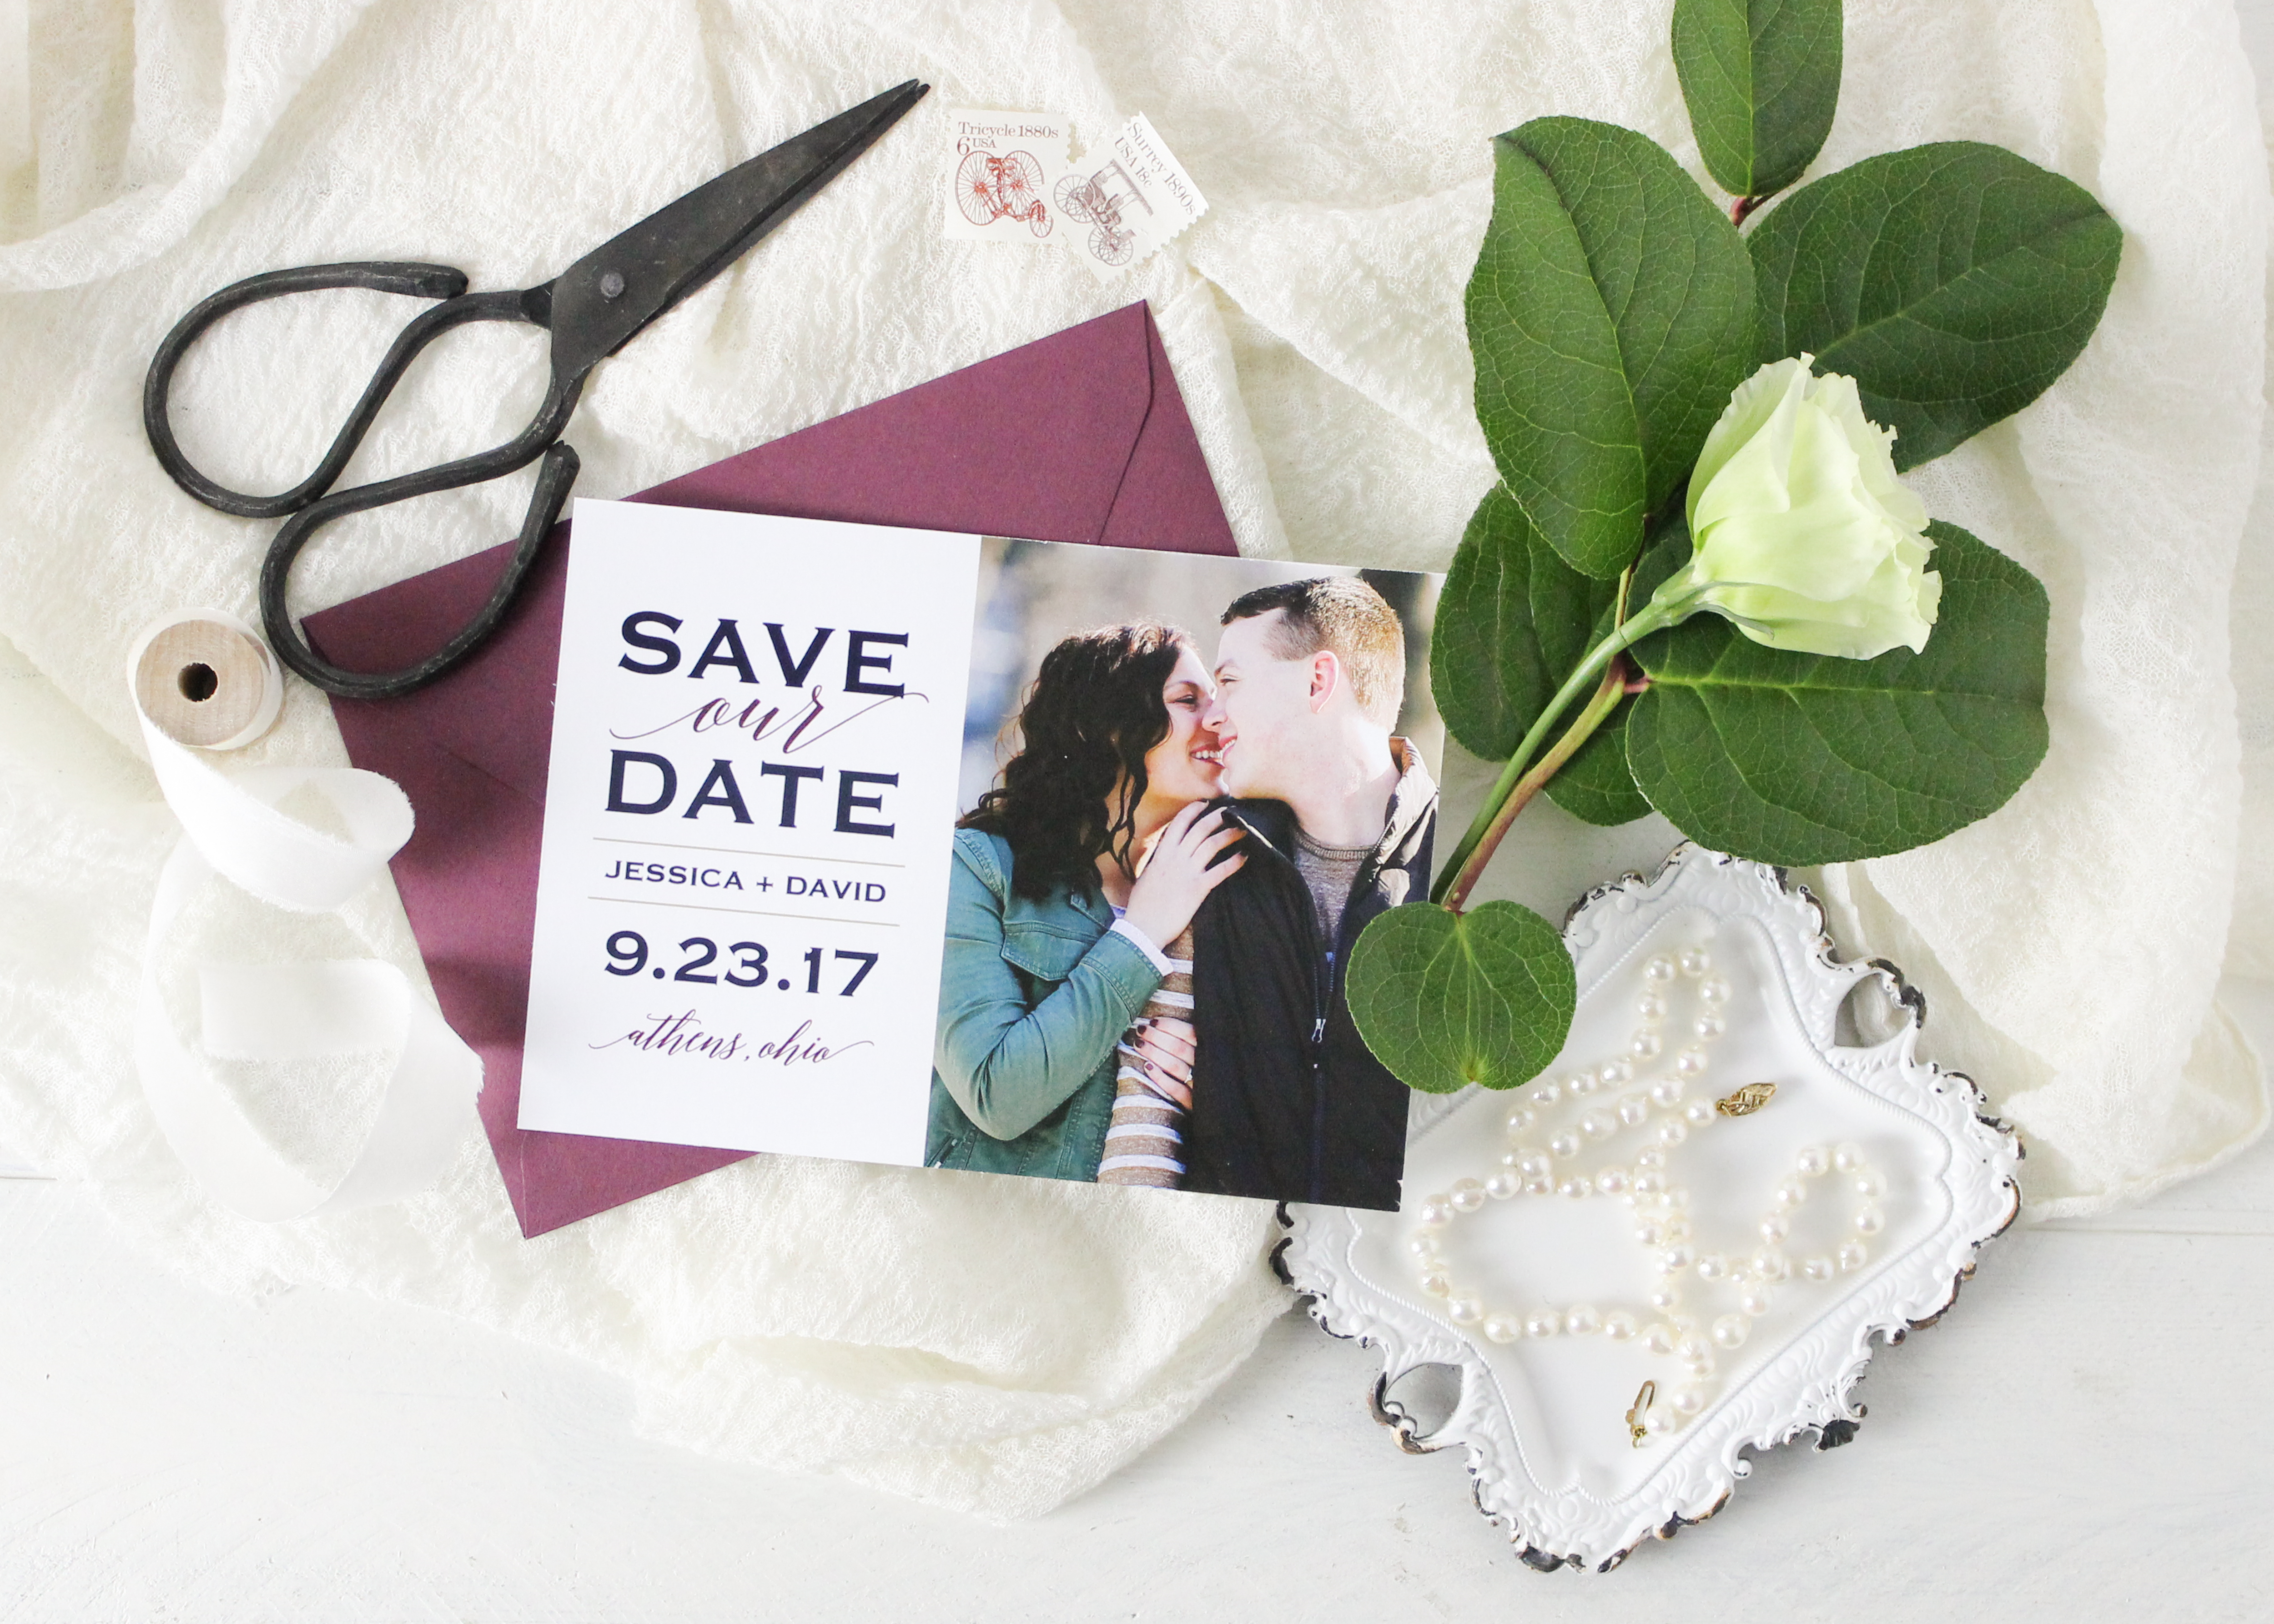 Why You Should Have Save The Dates, Save the Date | Monica Brown Photography | monicabrownphoto.com